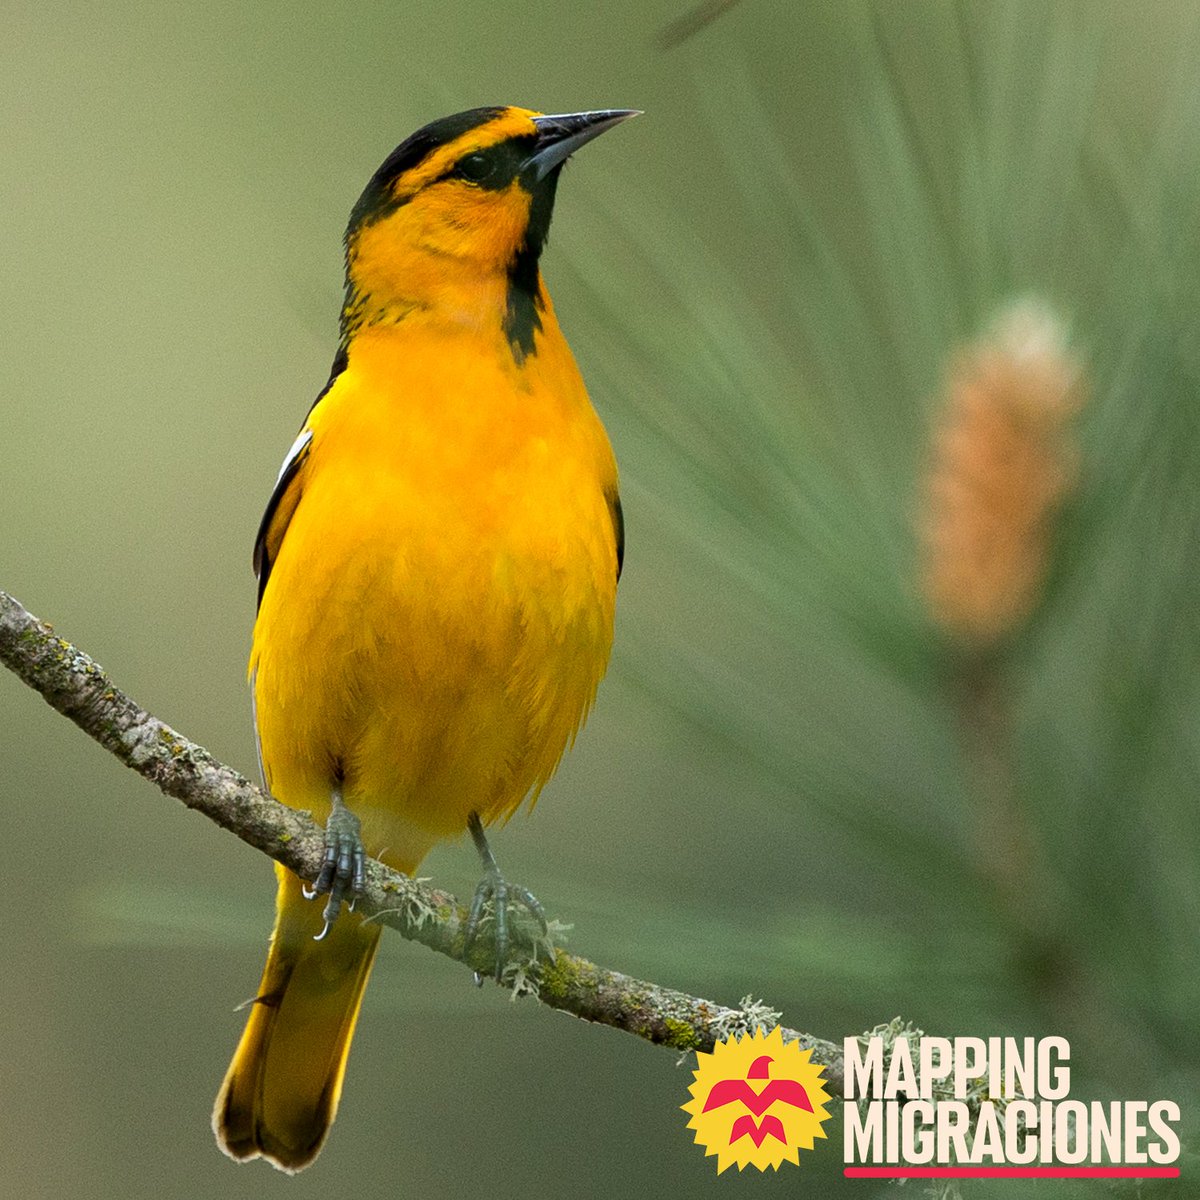 “Mapping Migraciones” was a year-long project by Audubon & @LatinoOutdoors celebrating Latinidad, migration, and the stories that connect us across the globe. For #YoCuento, explore people’s stories of migration & the birds that cross their paths. bit.ly/3Mu5AGl